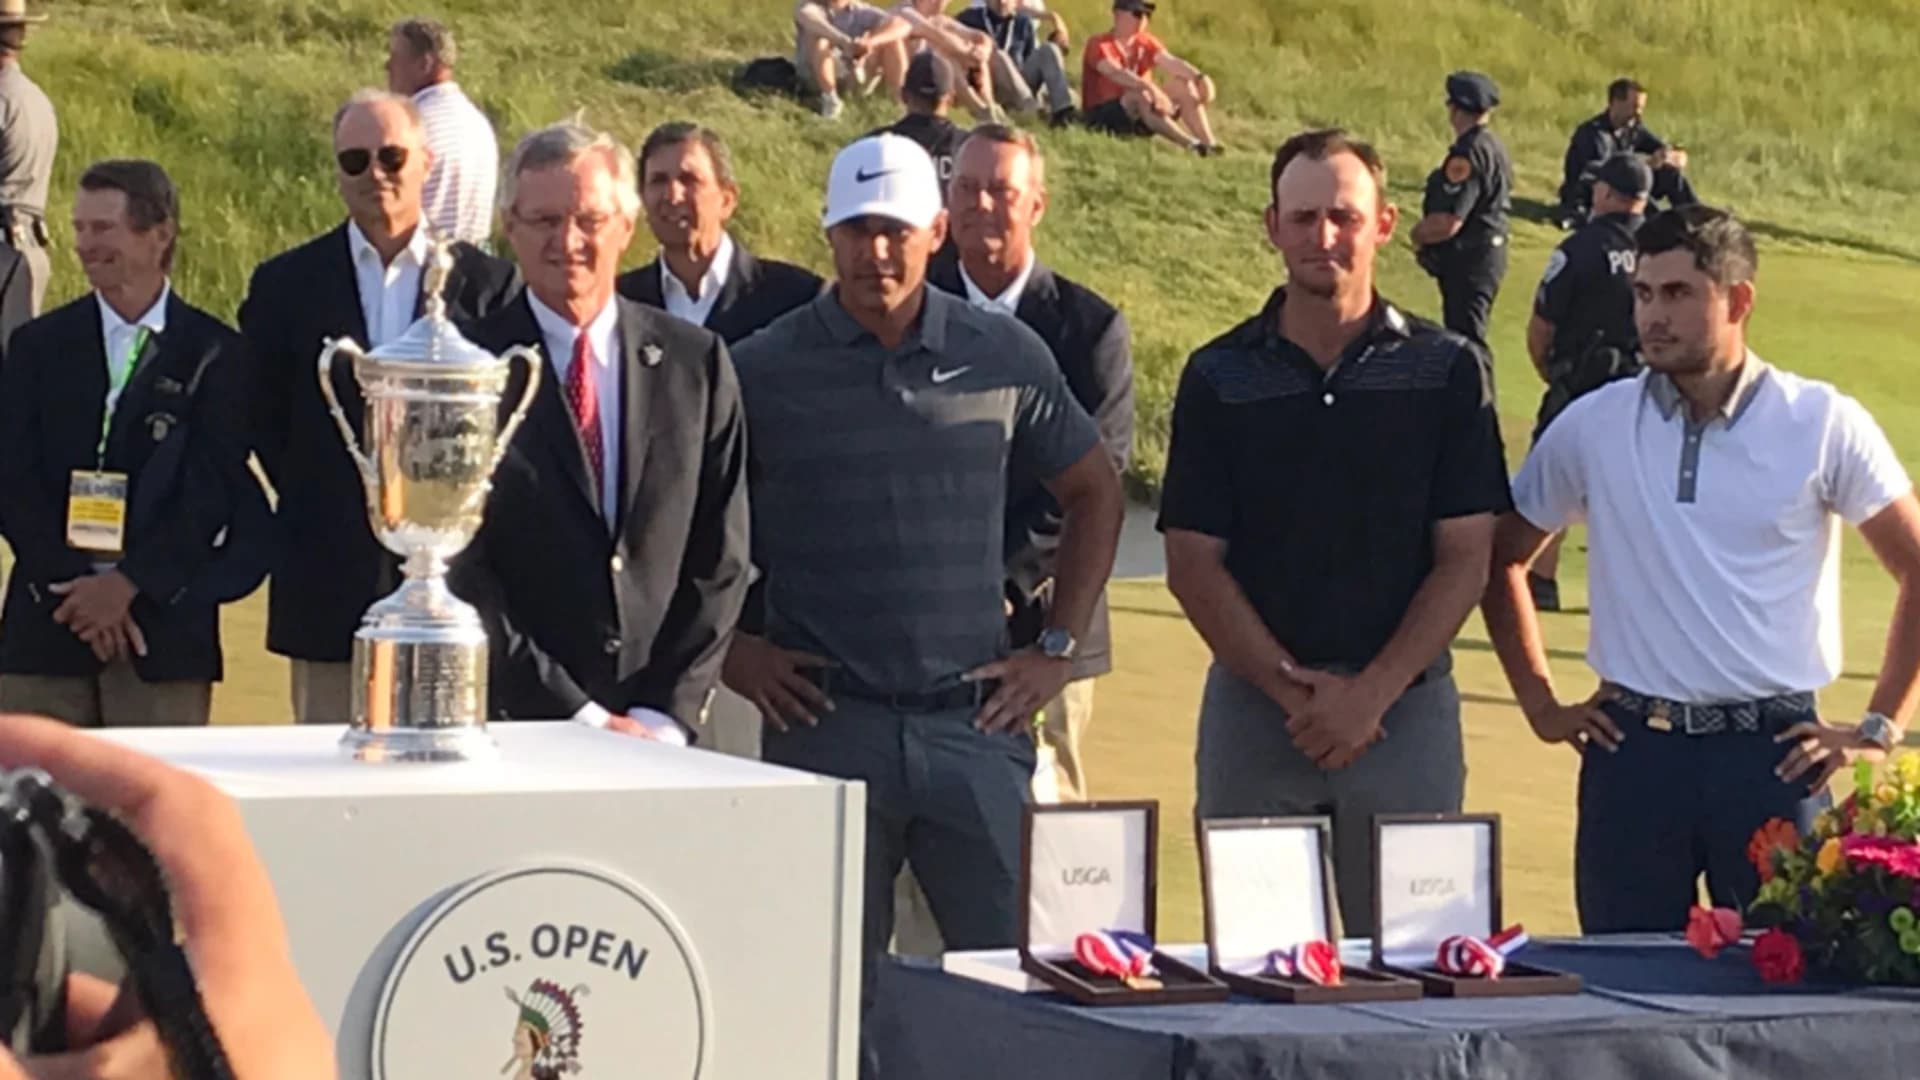 Tough course or easy, Brooks Koepka repeats as US Open champ